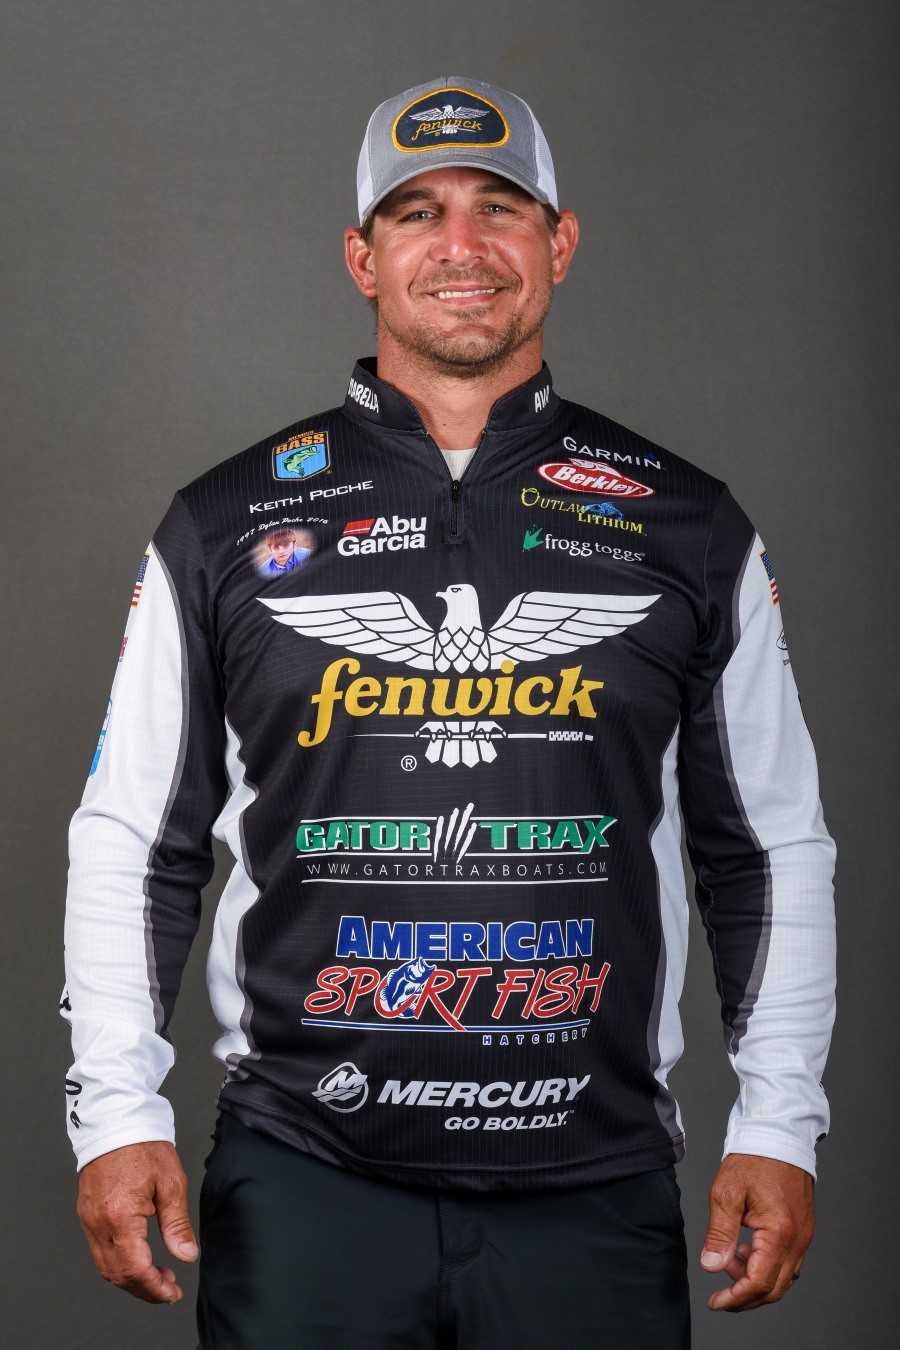 Poche Disqualified from Bassmaster Elite Tournament at Lake Murray